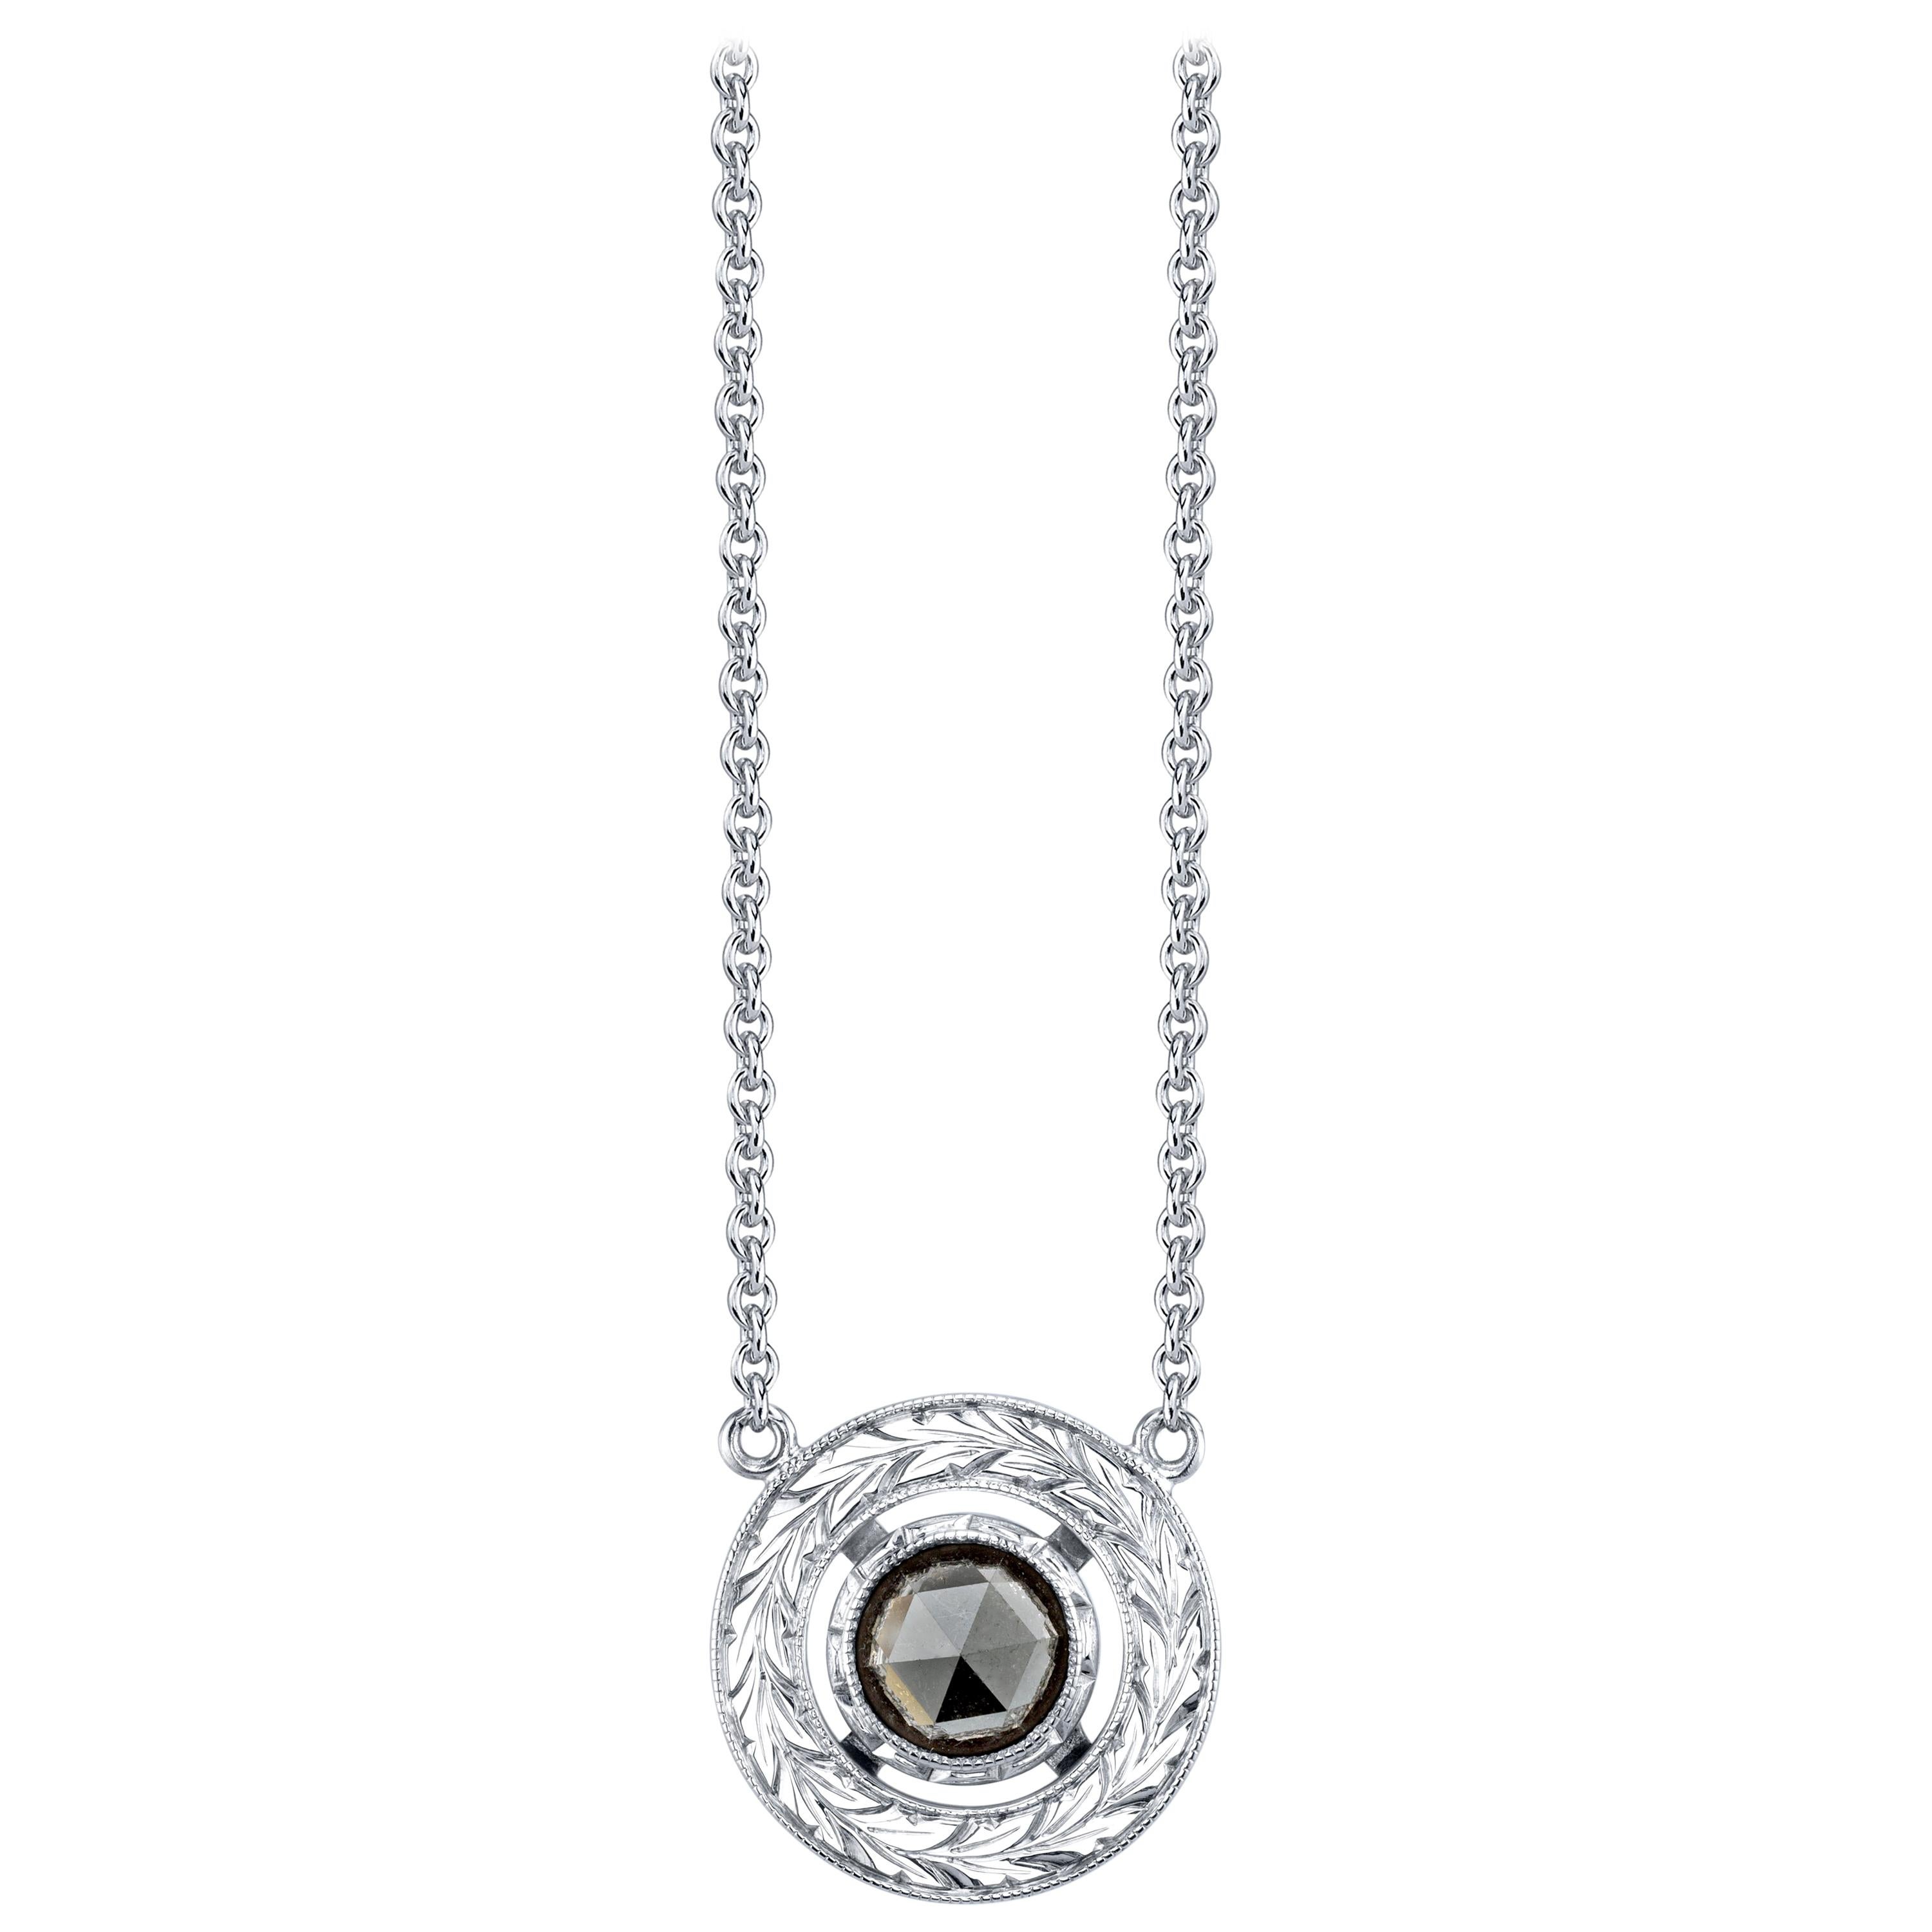 Rose Cut Black Diamond Necklace in 18k White Gold, 1.33 Carat For Sale